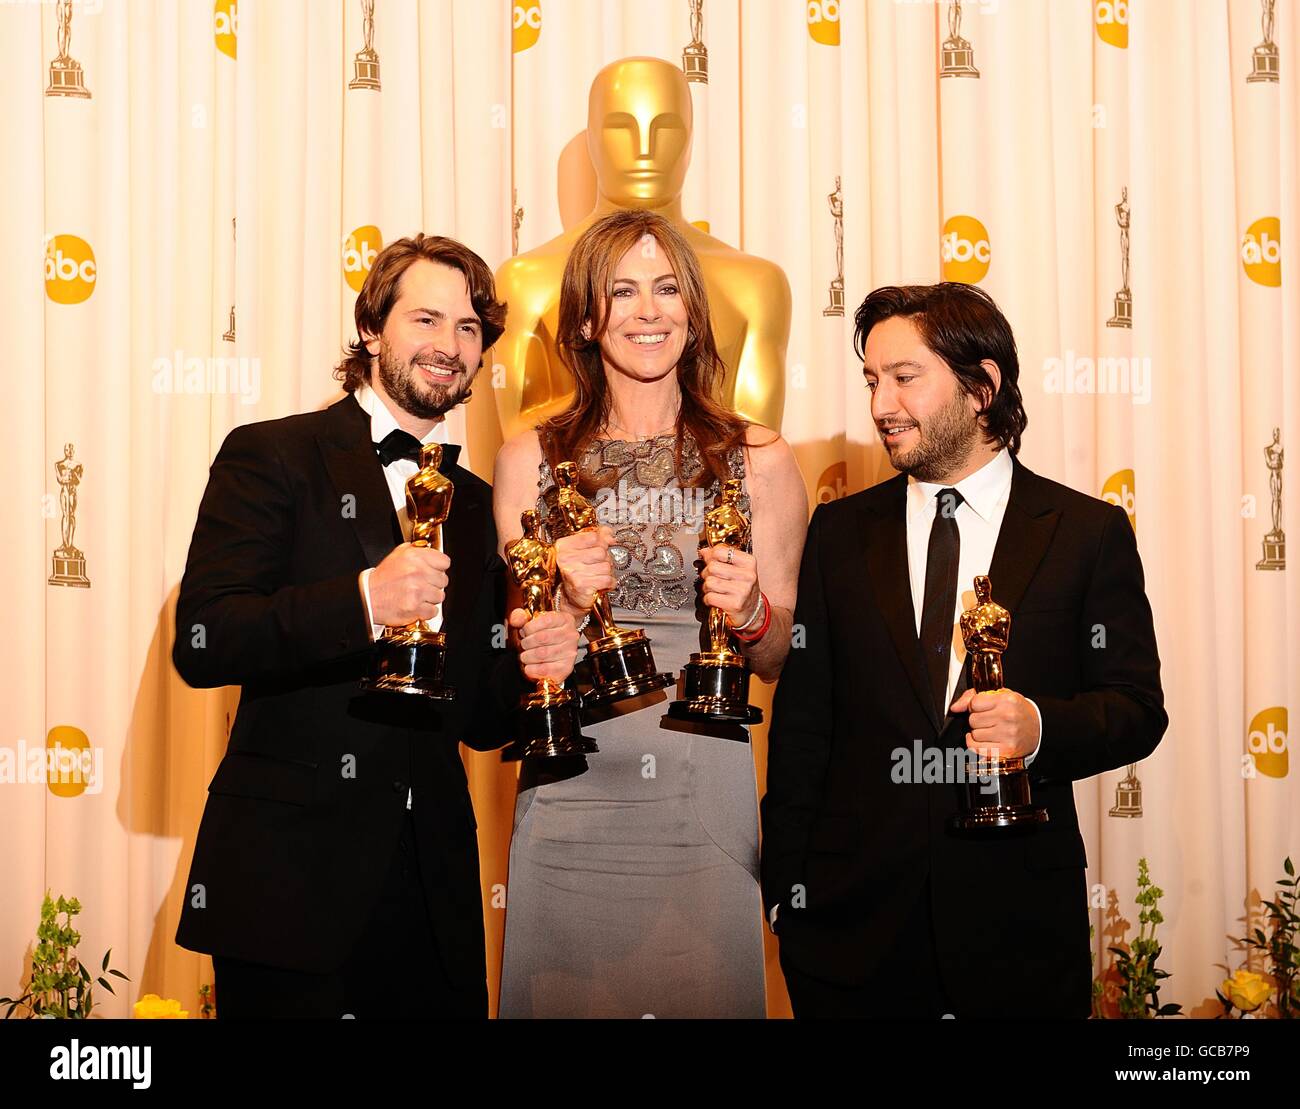 (left to right) Mark Boal, Kathryn Bigelow and Greg Shapiro with their awards for Best Picture for The Hurt Locker, at the 82nd Academy Awards at the Kodak Theatre, Los Angeles. Stock Photo